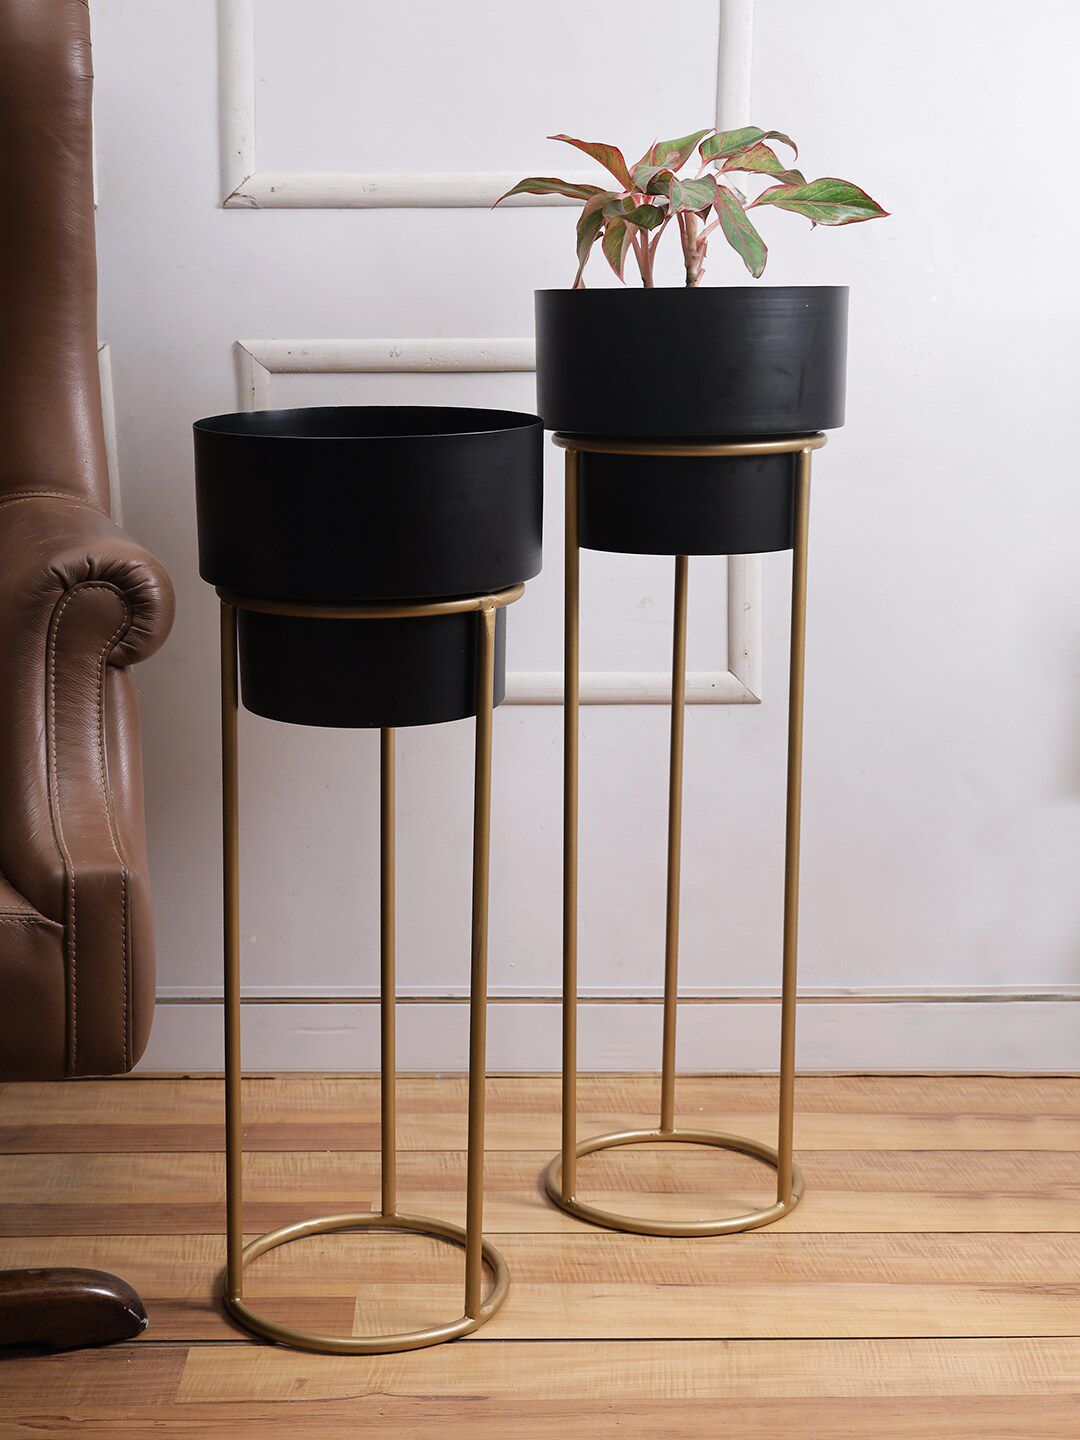 Aapno Rajasthan Set Of 2 Black & Gold-Toned Planters With Stand Price in India